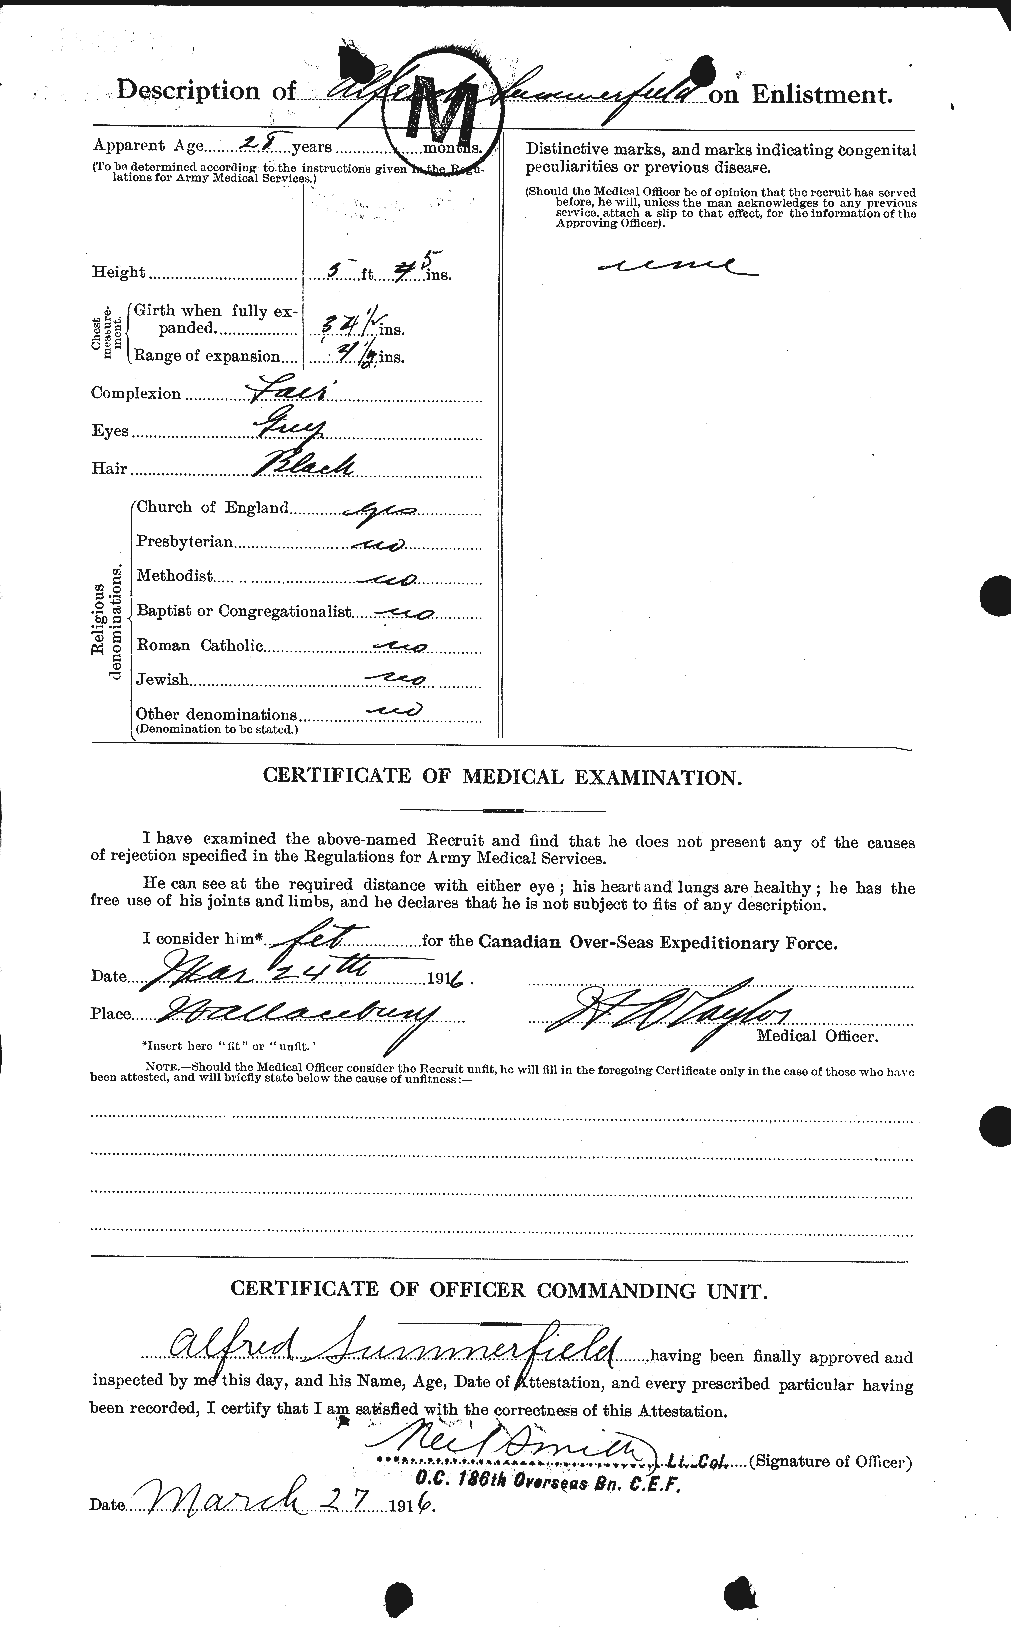 Personnel Records of the First World War - CEF 124052b